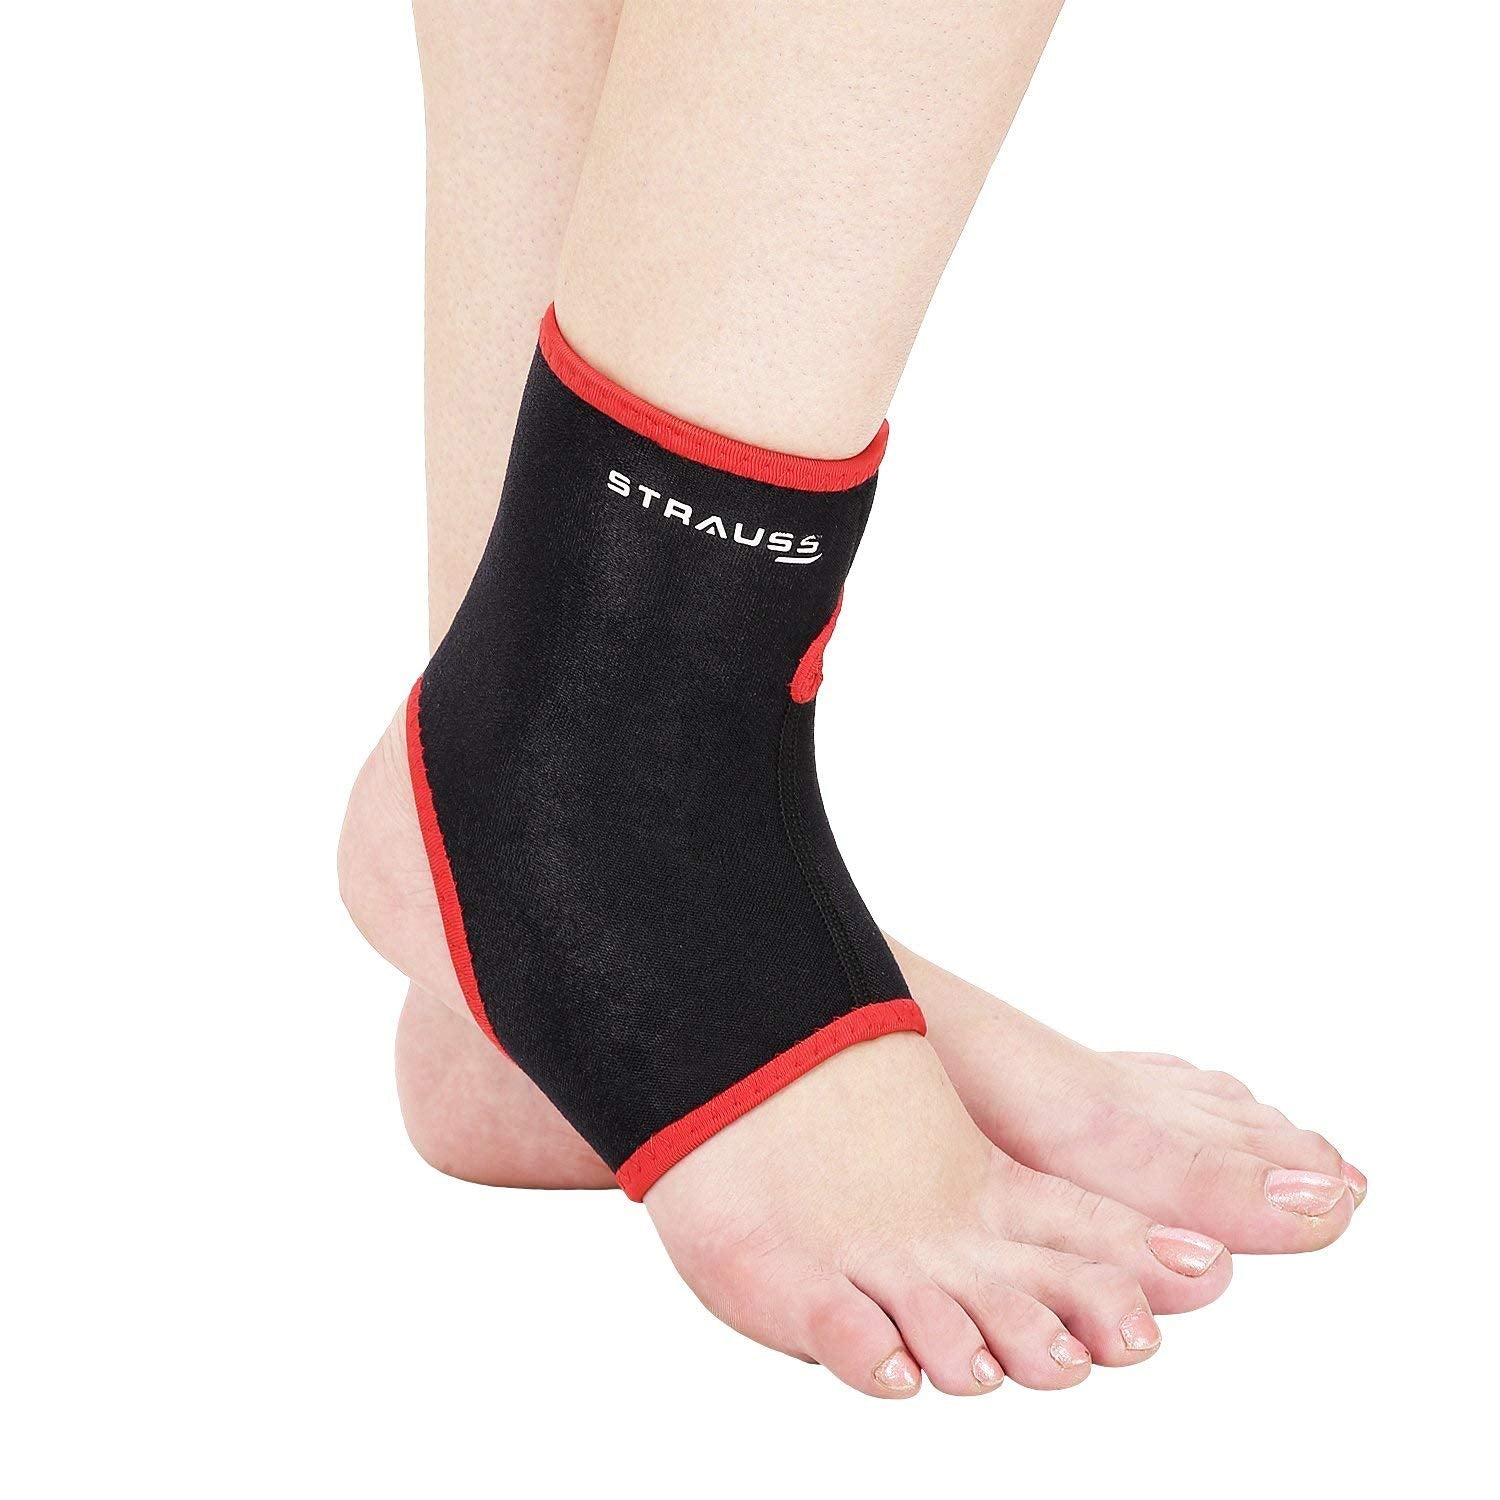 Strauss Ankle Support, Large for Ankle Injury Pain Relief Ankle Brace for Women and Men, Ankle Brace (Large)